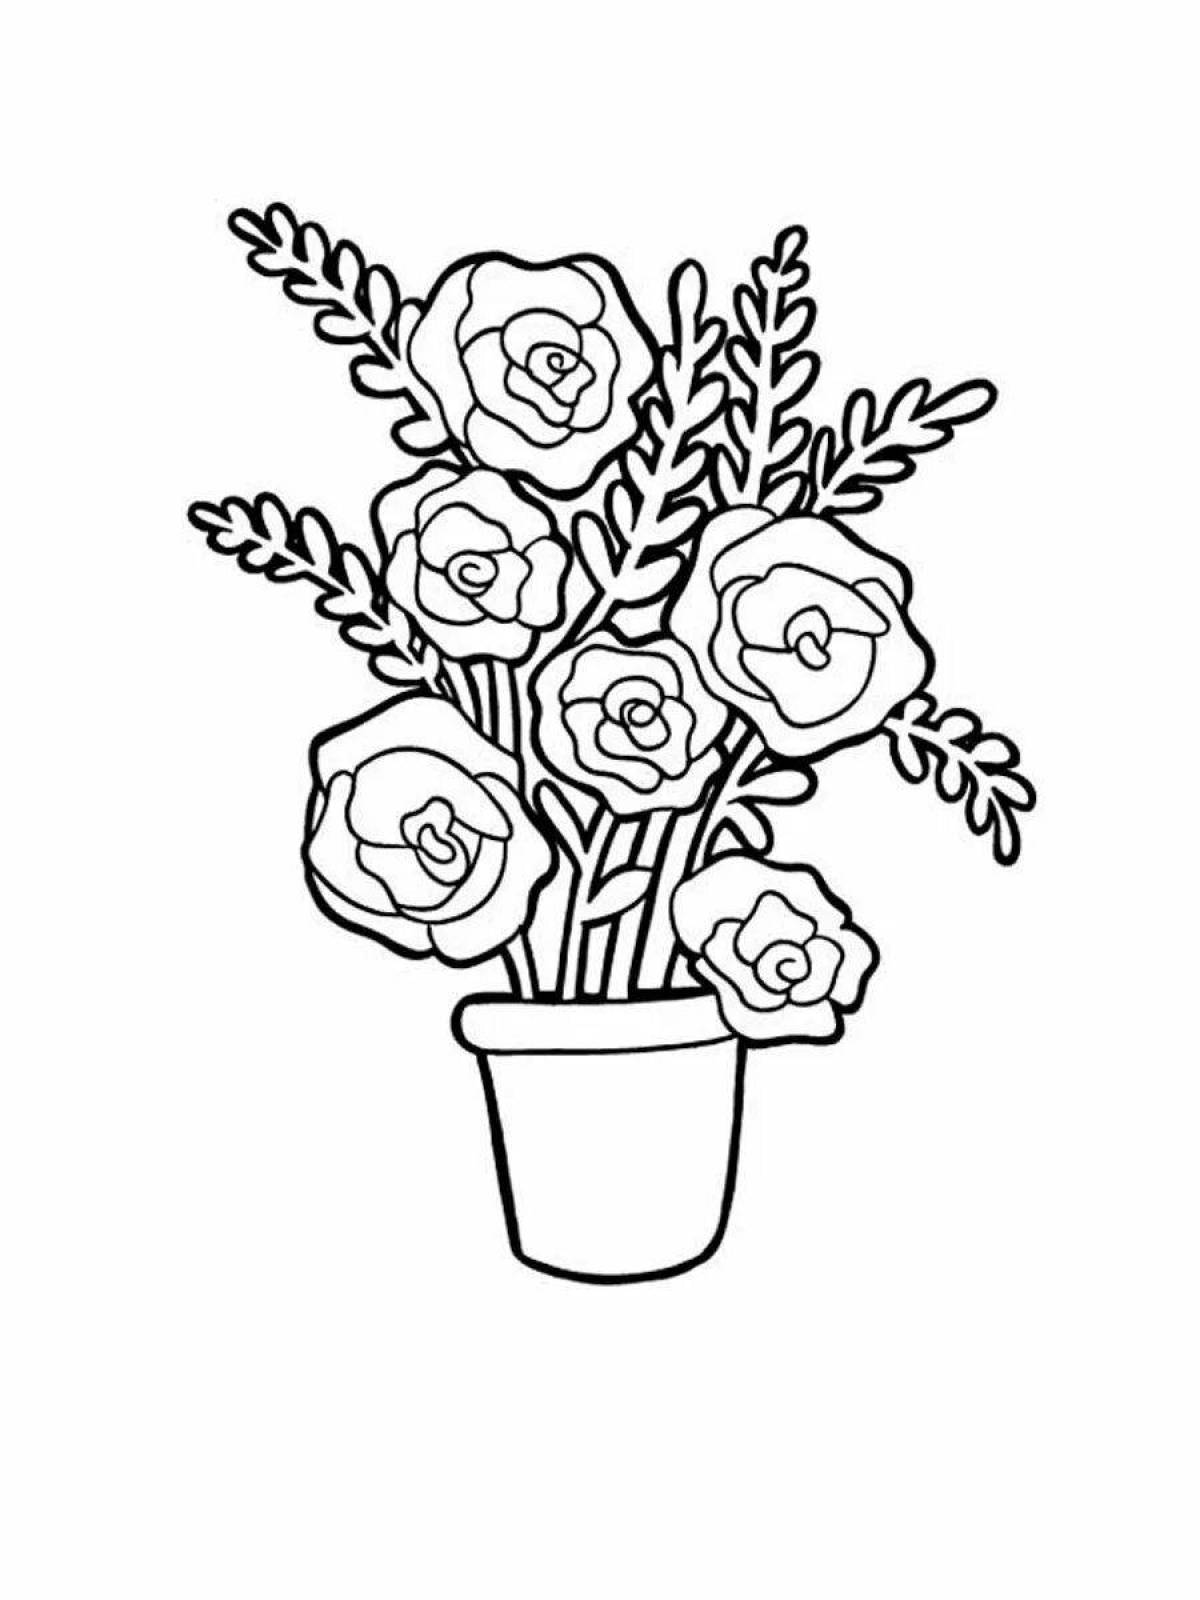 Coloring book a magnificent bouquet of flowers in a vase